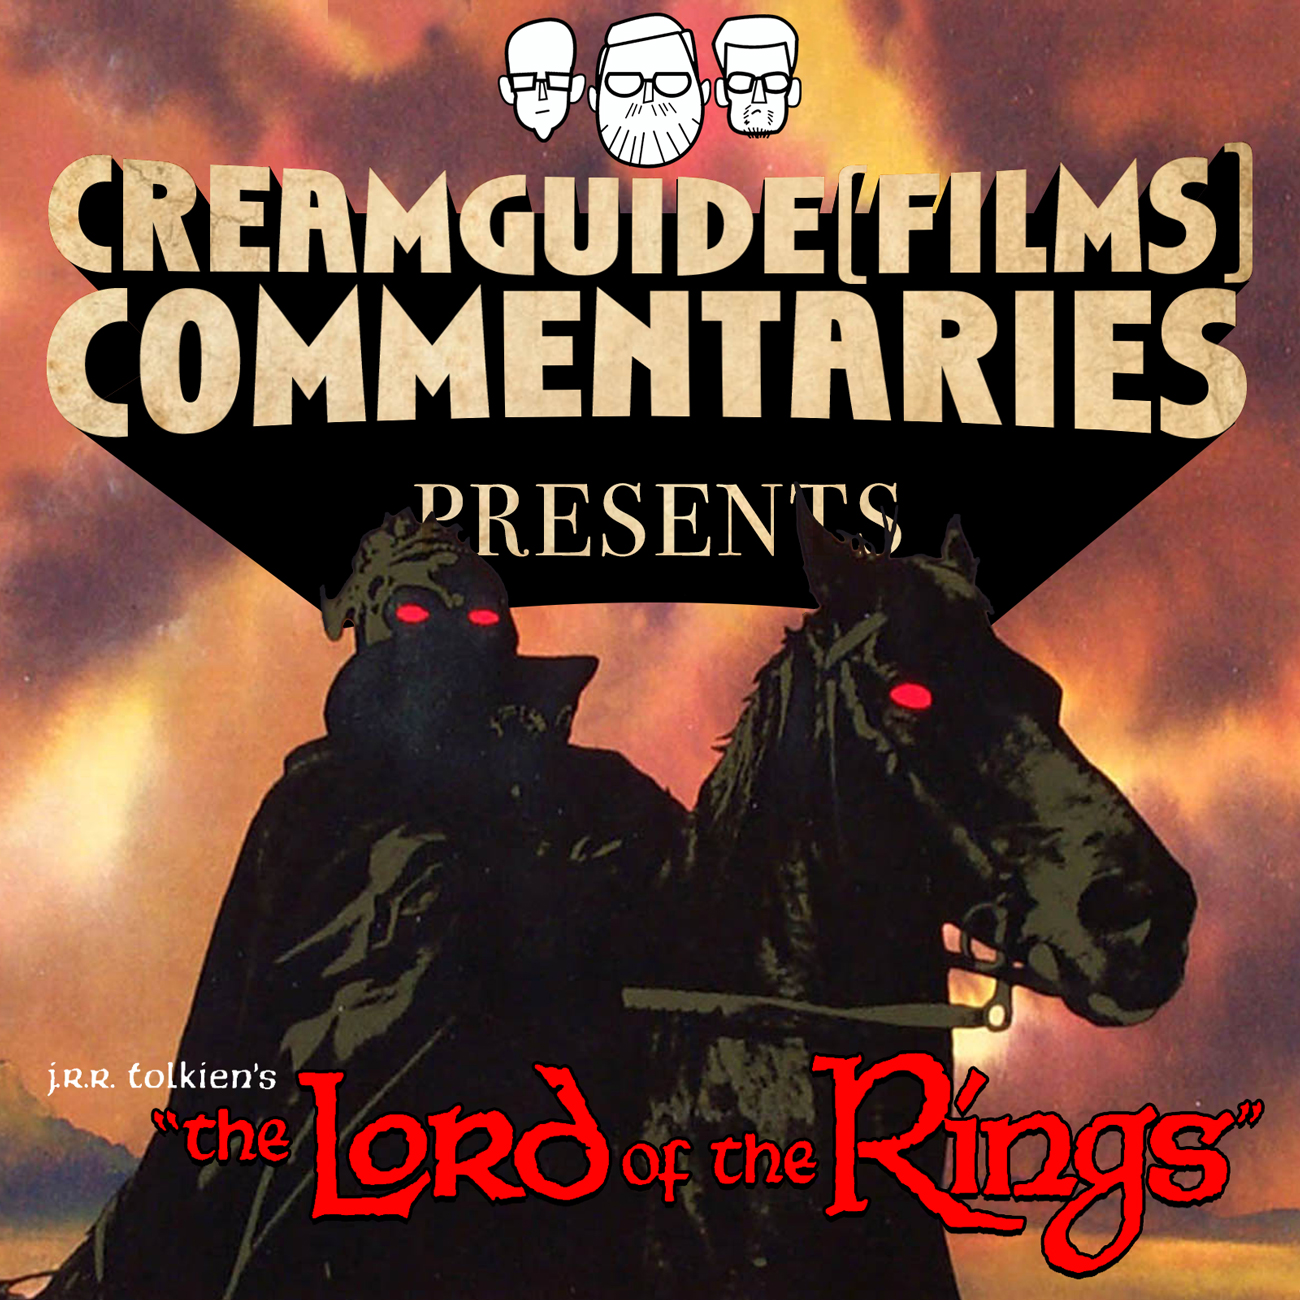 Creamguide (Films) Commentaries: The Lord of the Rings